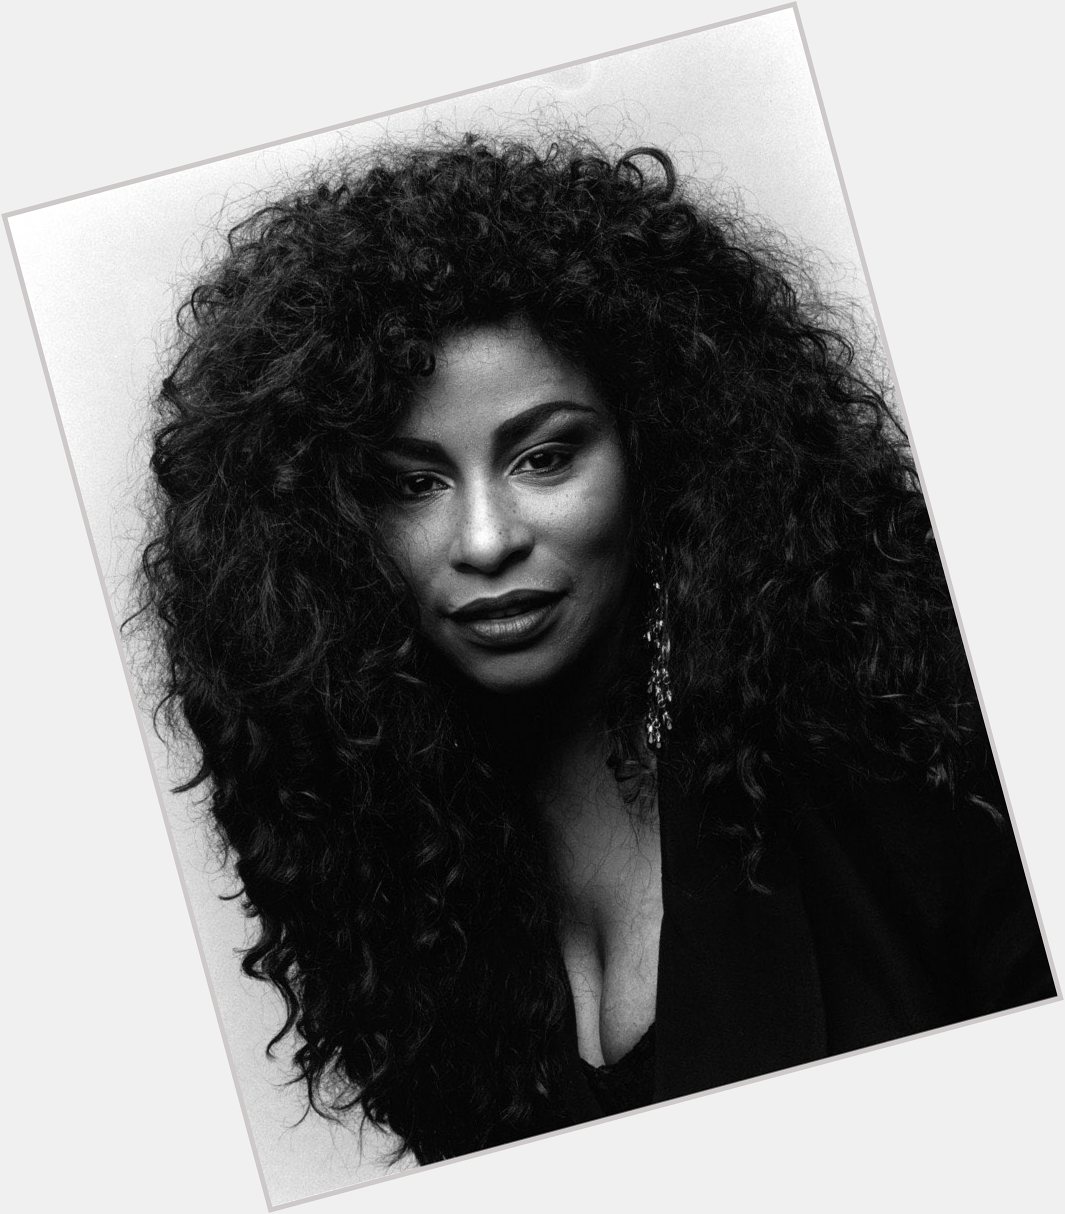 Just spent my lunch dancing to Chaka Khan in my kitchen. Happy belated Birthday!!! 